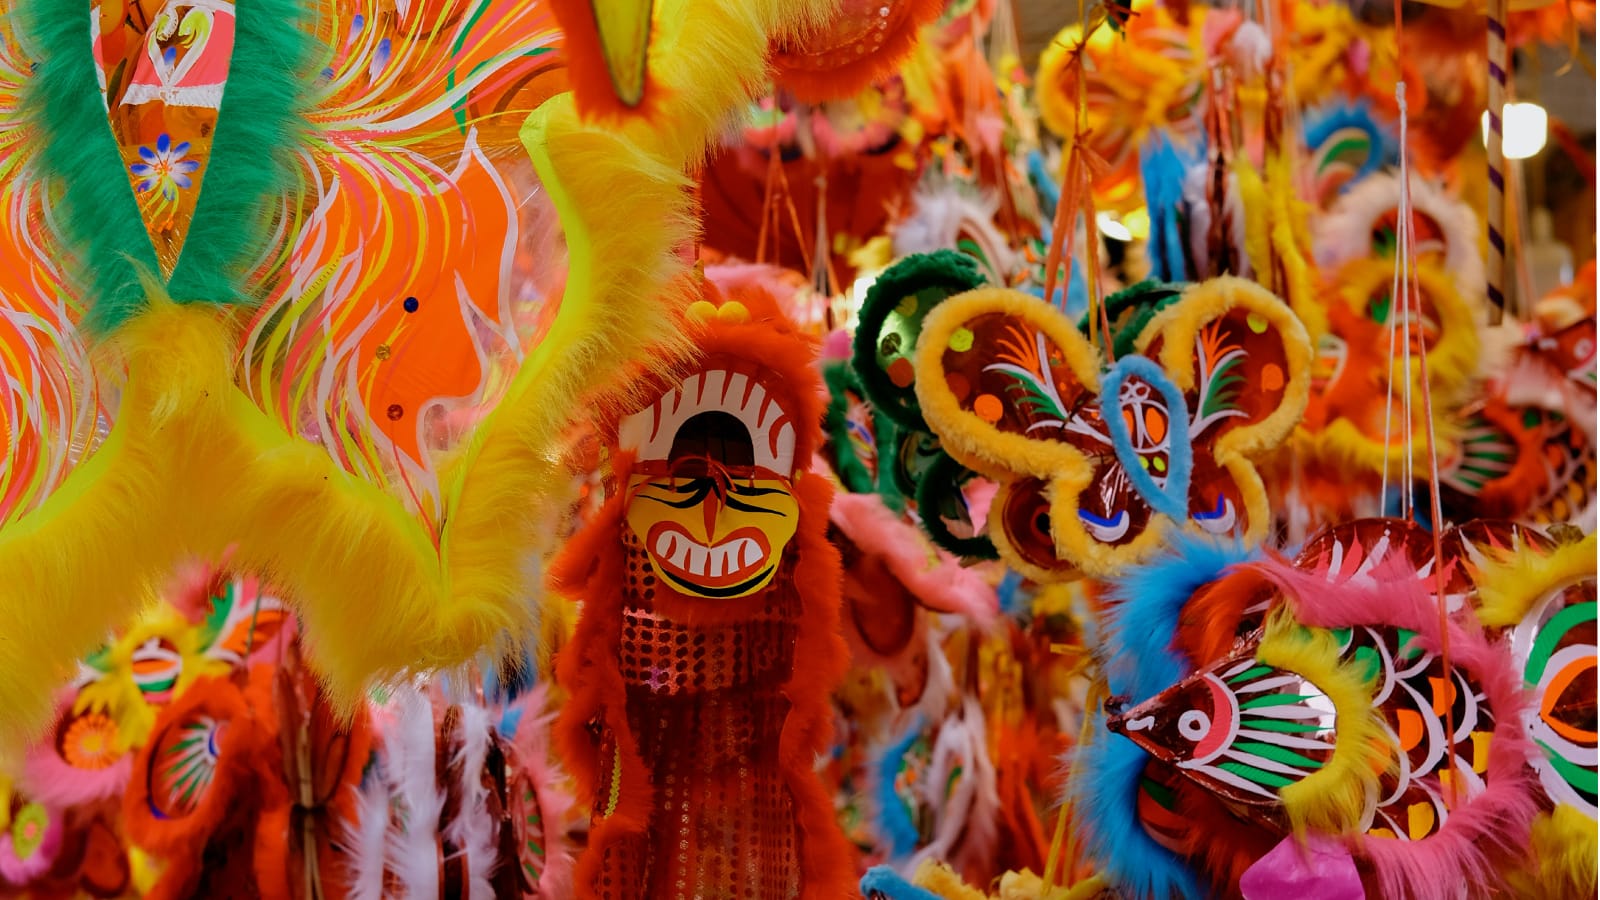 Colourful masks covered in feathers